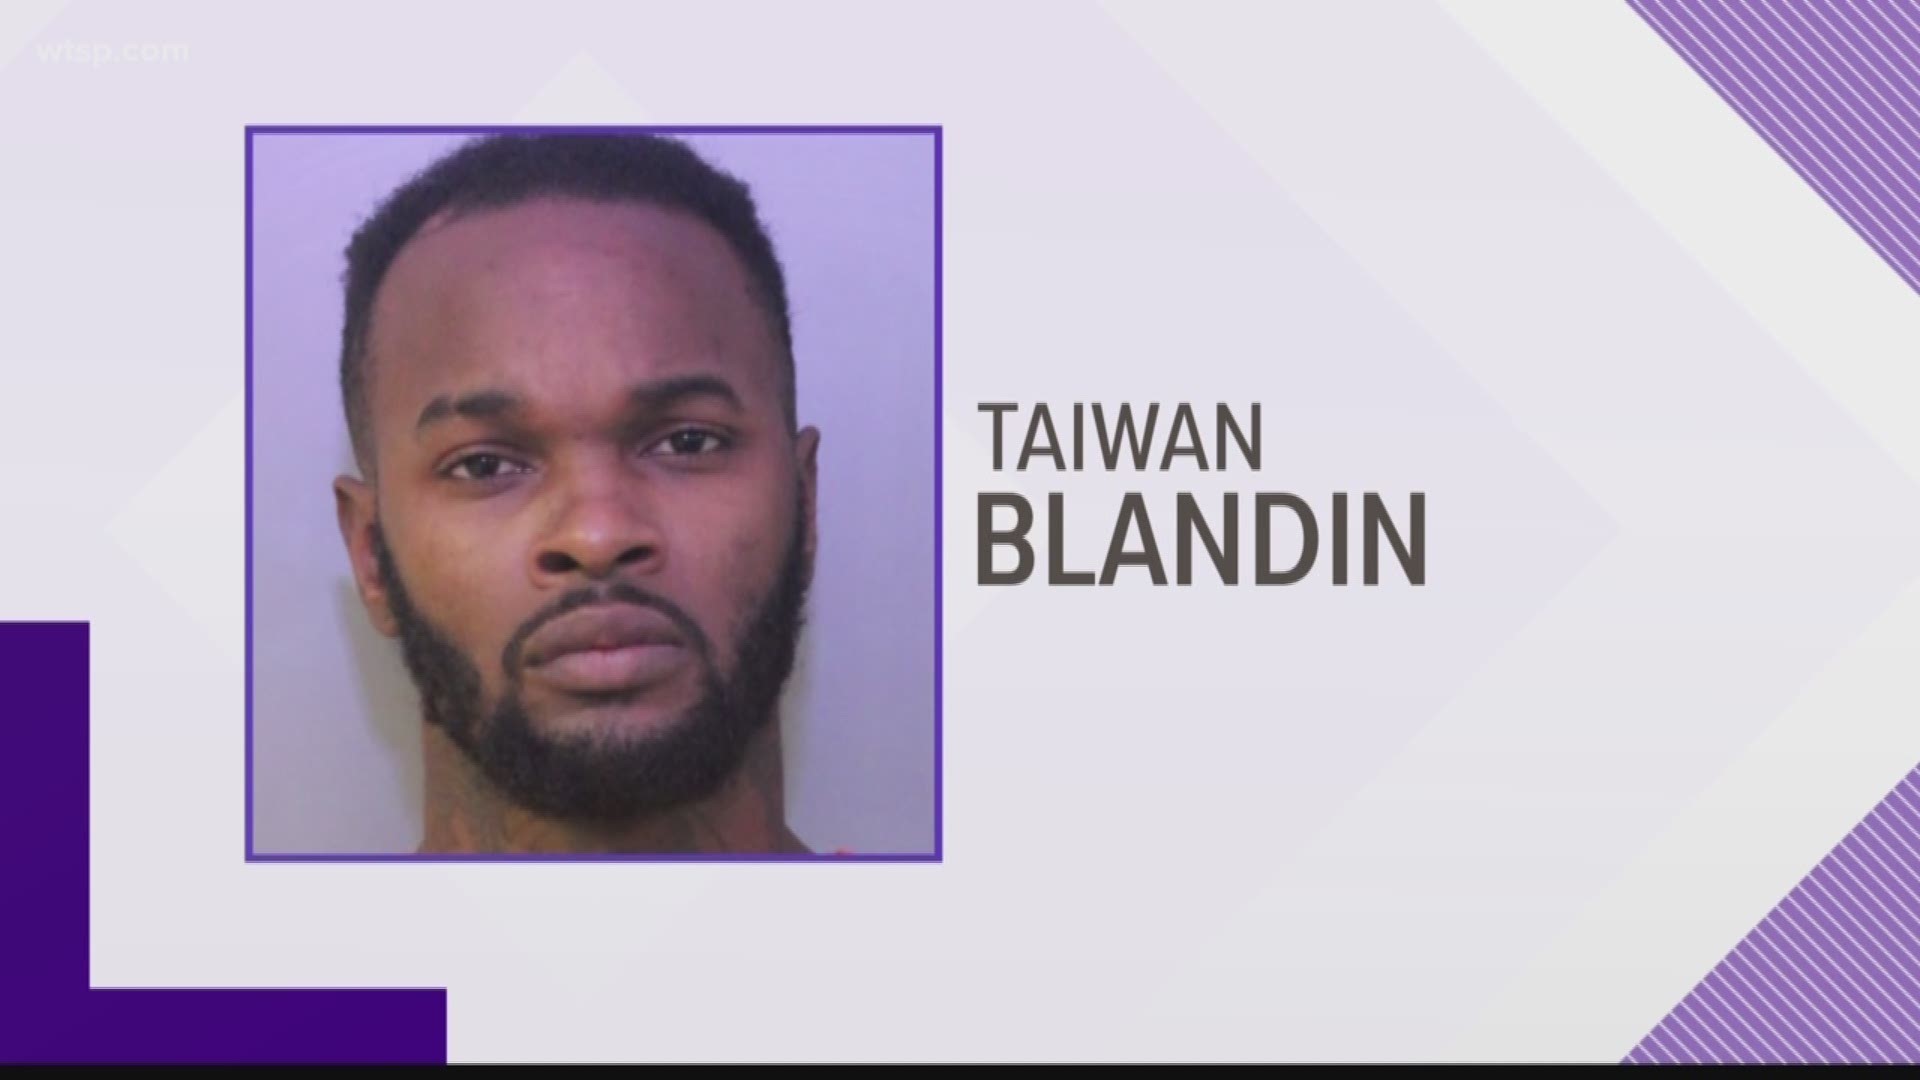 Taiwan Blandin is accused of killing an elderly woman and sexually battering another woman.